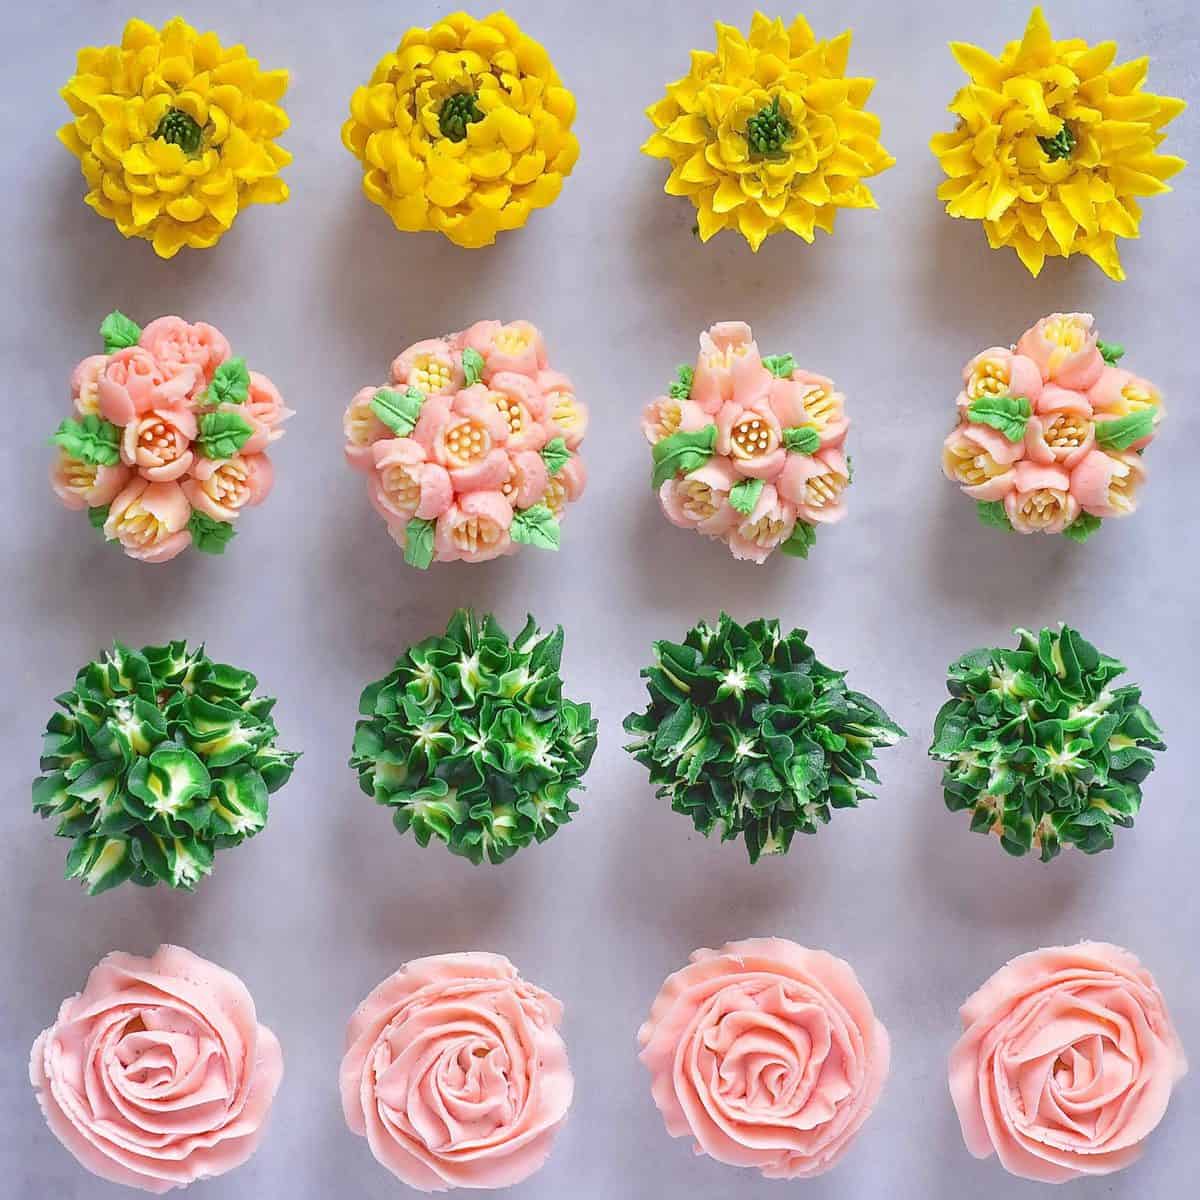 frosted floral cupcakes organic eggs flowers buttercream